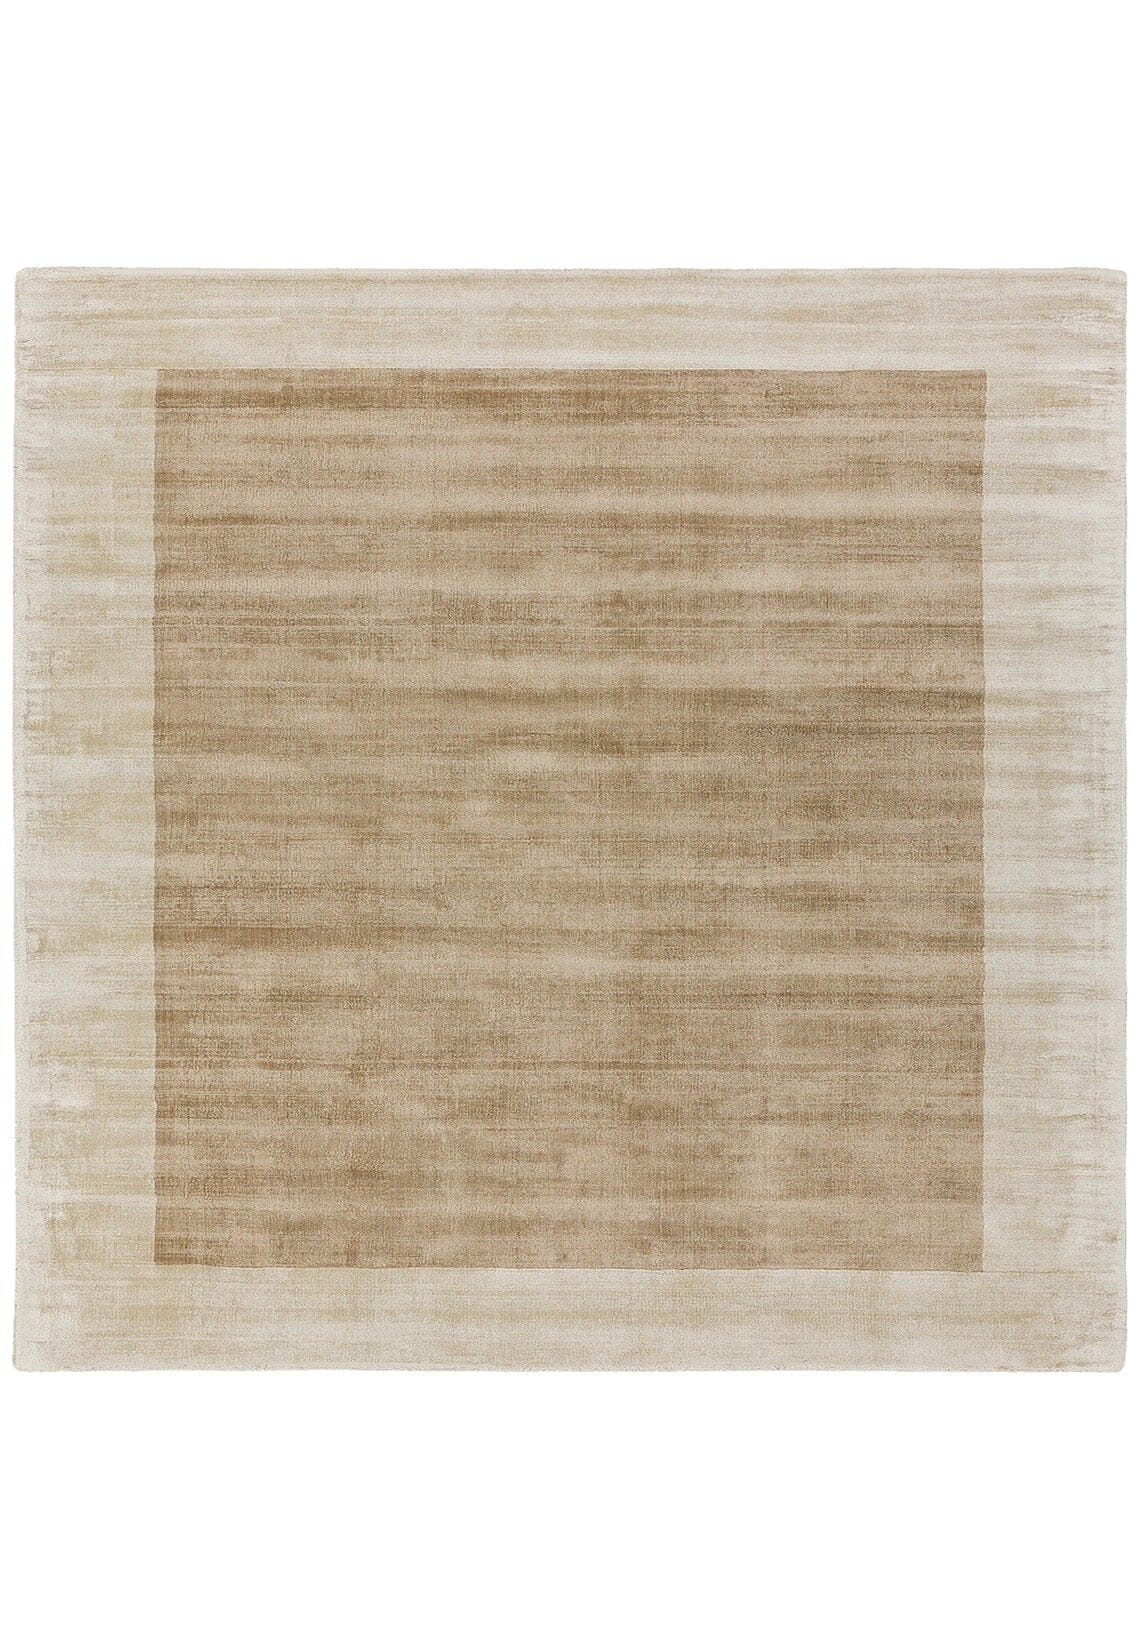  Asiatic Carpets-Asiatic Carpets Blade Hand Woven Rug Putty Champagne - 120 x 170cm-Beige, Natural 469 